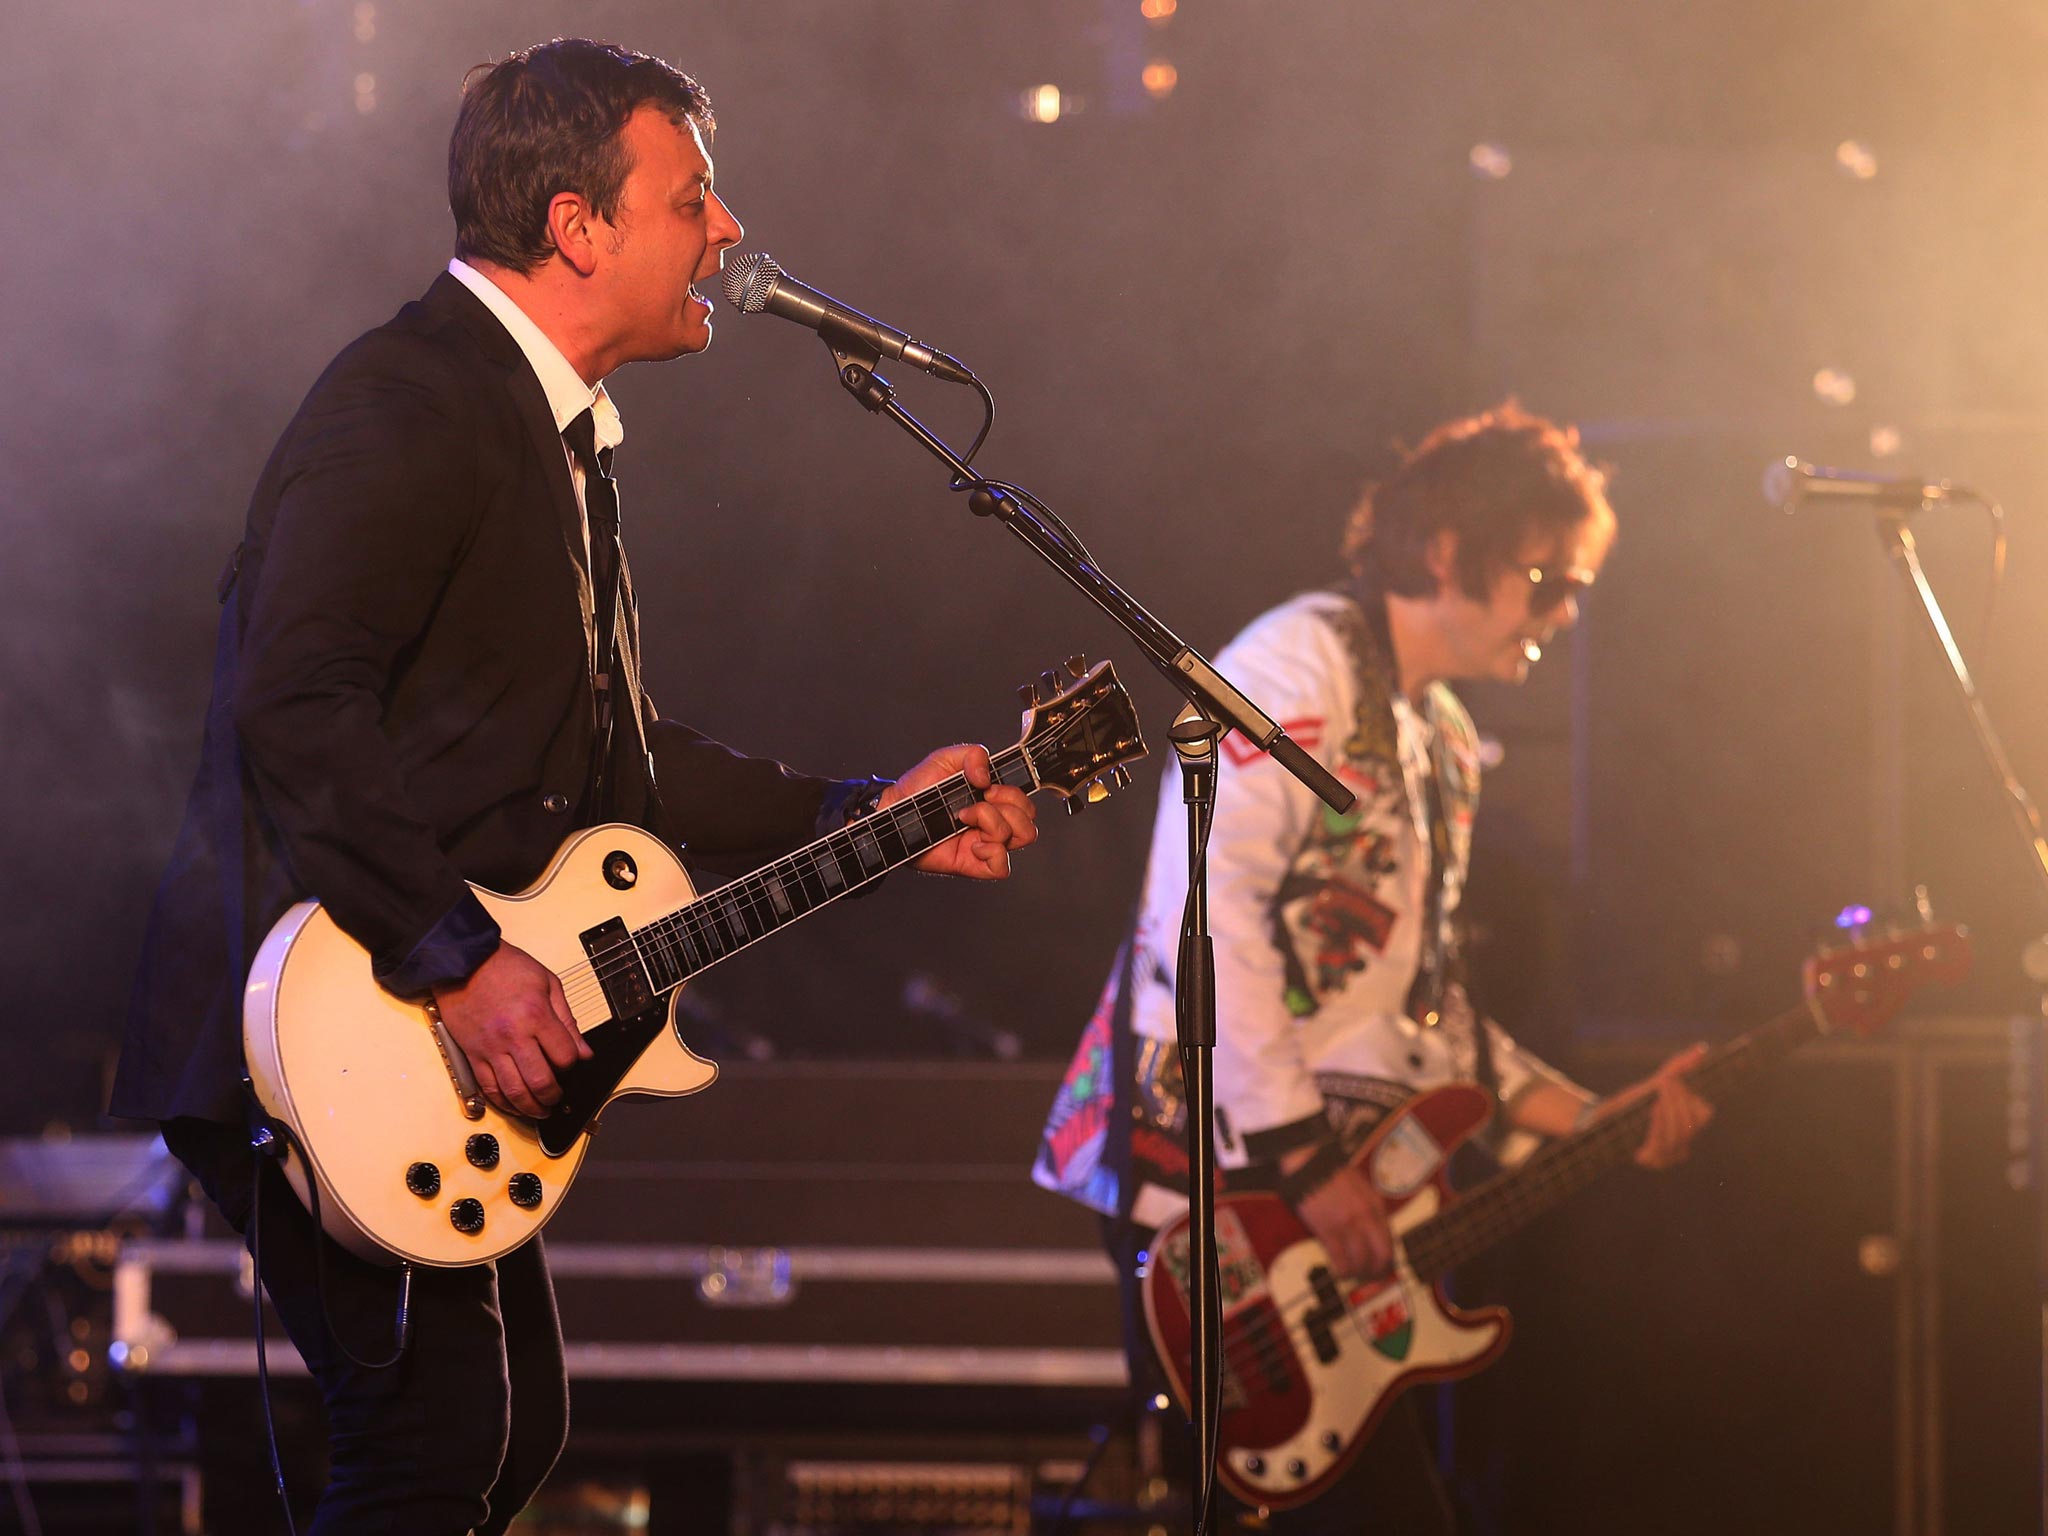 Manic Street Preachers (left to right) James Dean Bradfield and Nicky Wire perform in the King Tuts Wah Wah Tent at the T in the Park festival